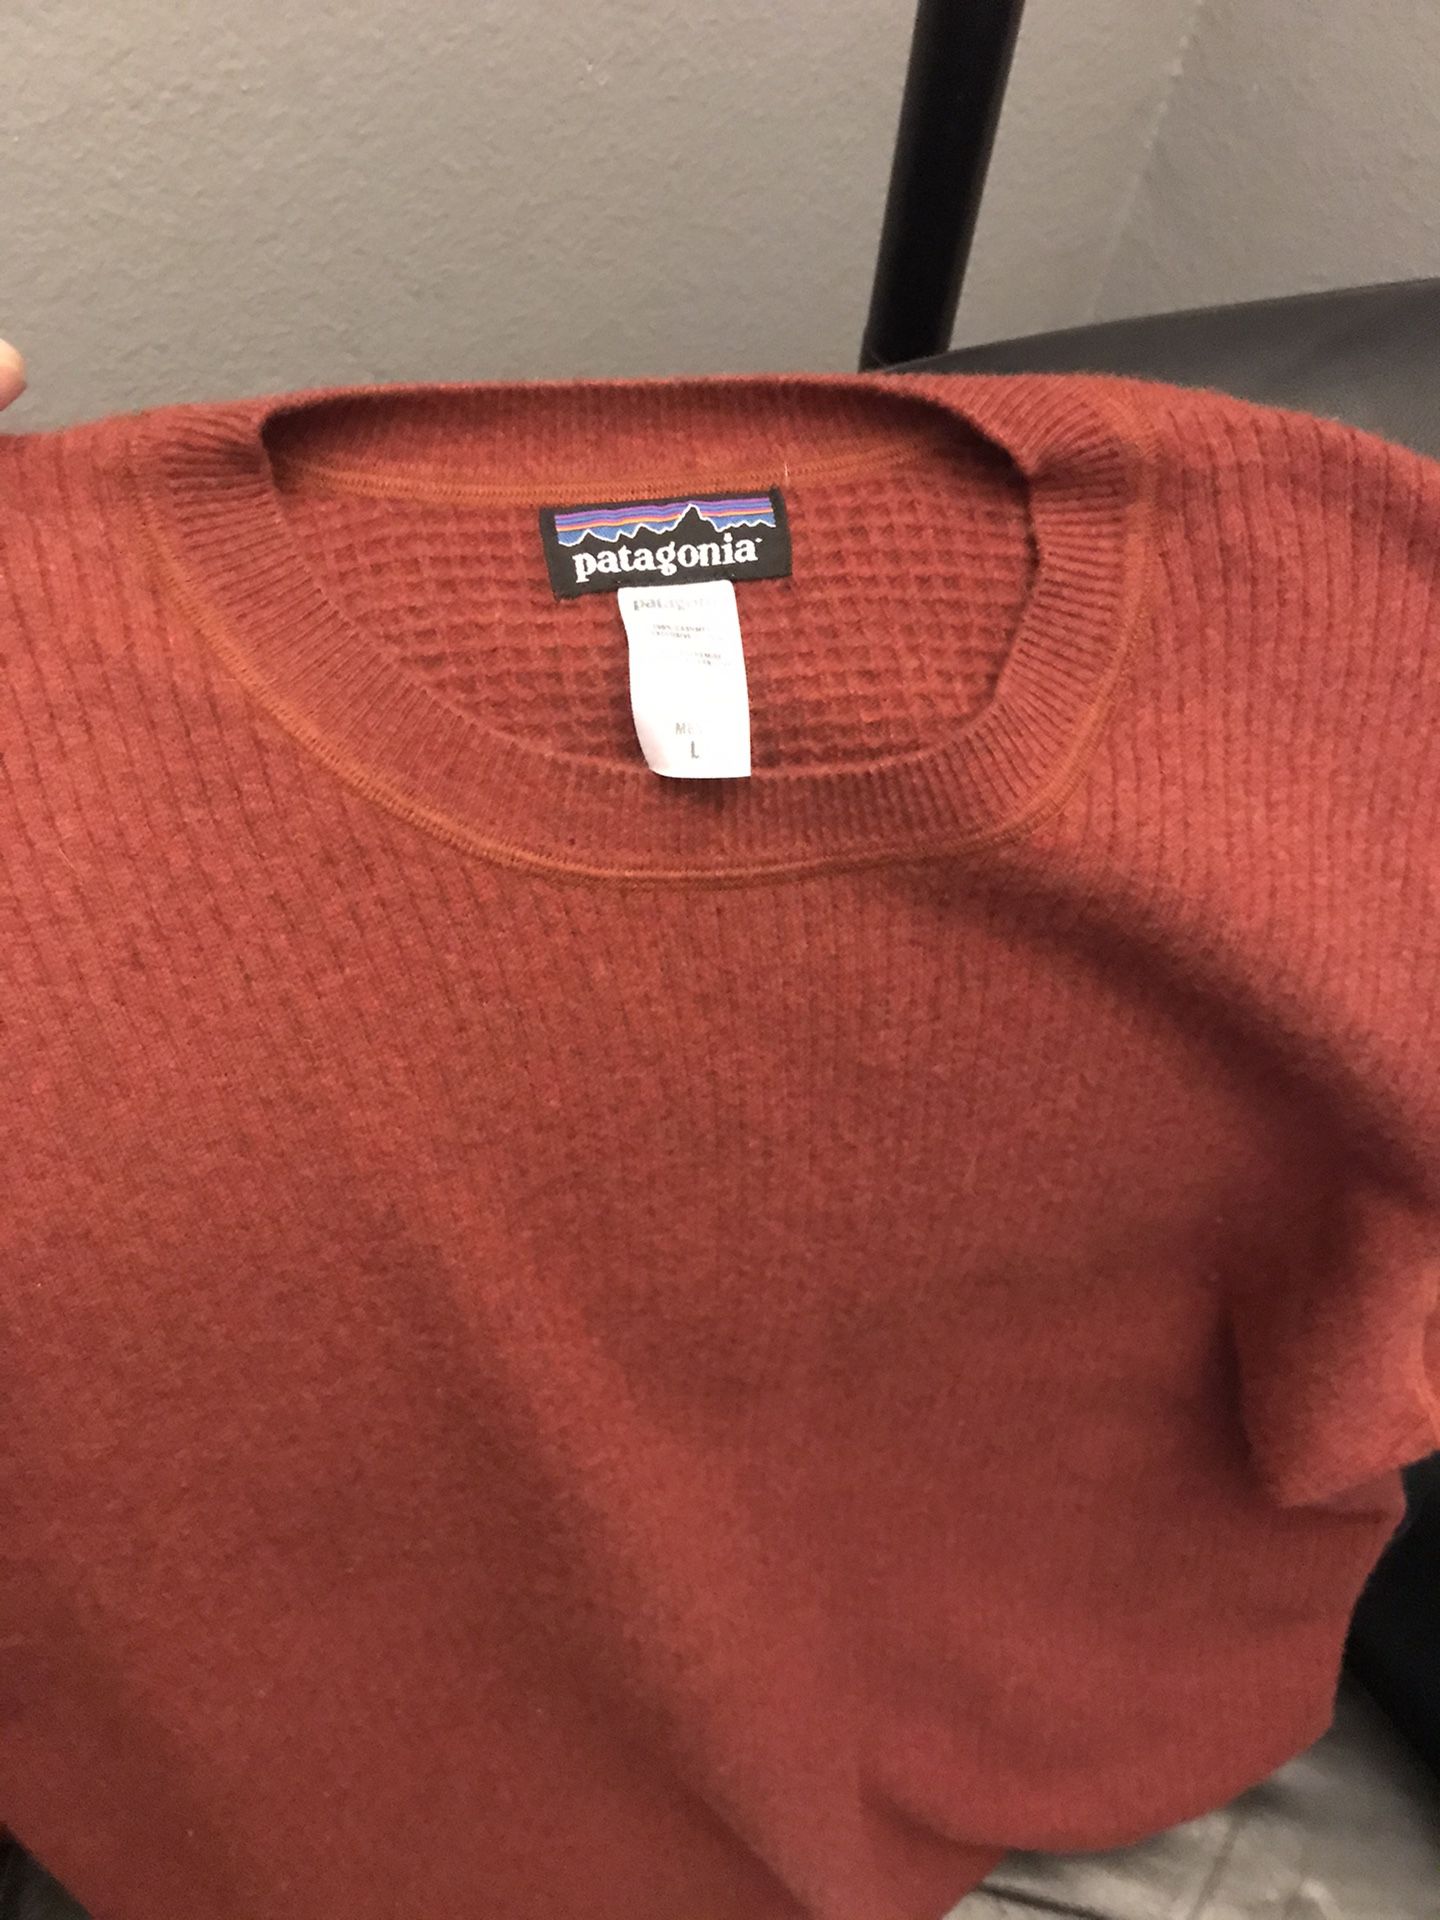 Patagonia Men’s large 100% cashmere sweater like new